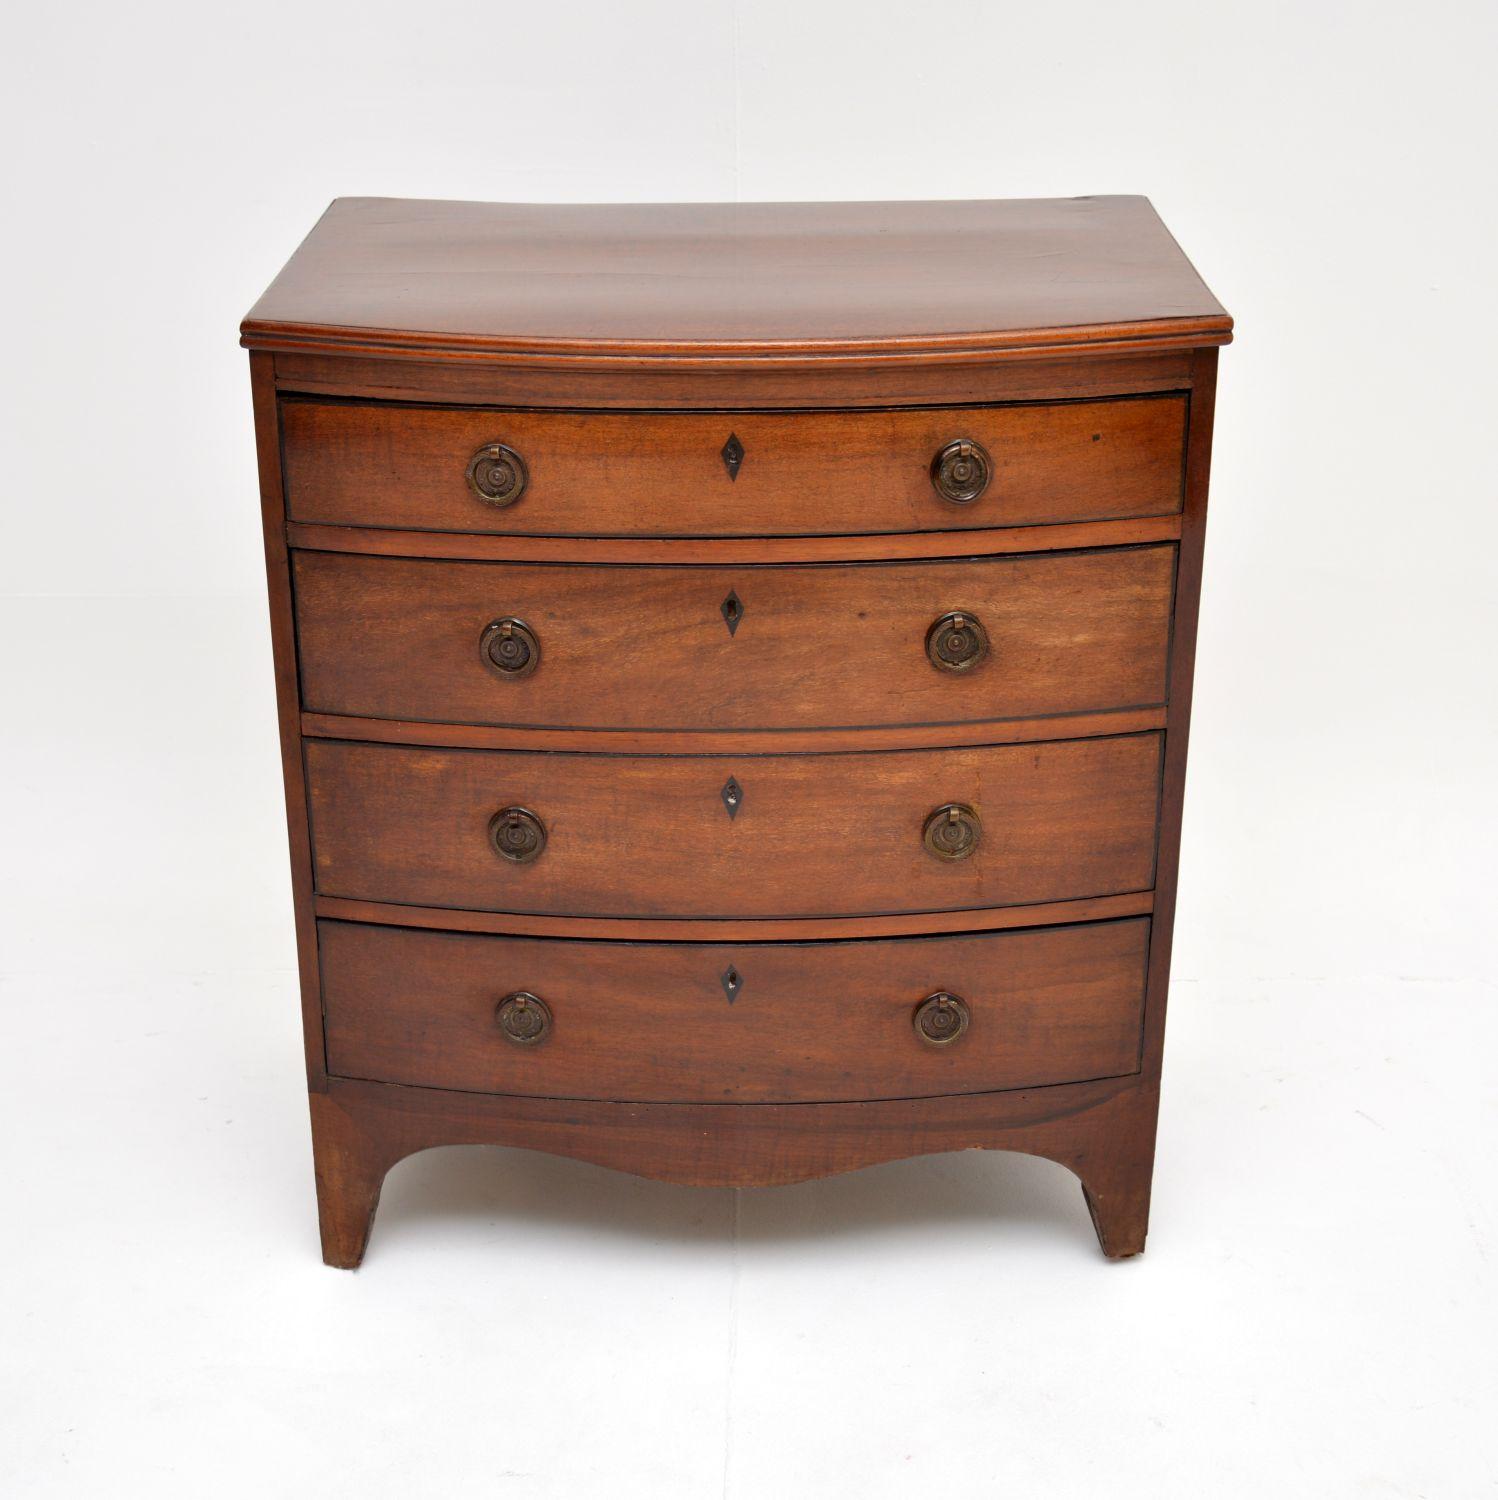 A very small and fine quality antique Georgian period bow front chest of drawers. This was made in England, it dates from around the 1790-1810 period.

It is very well made and has lovely, very useful proportions. The wood has a gorgeous colour tone